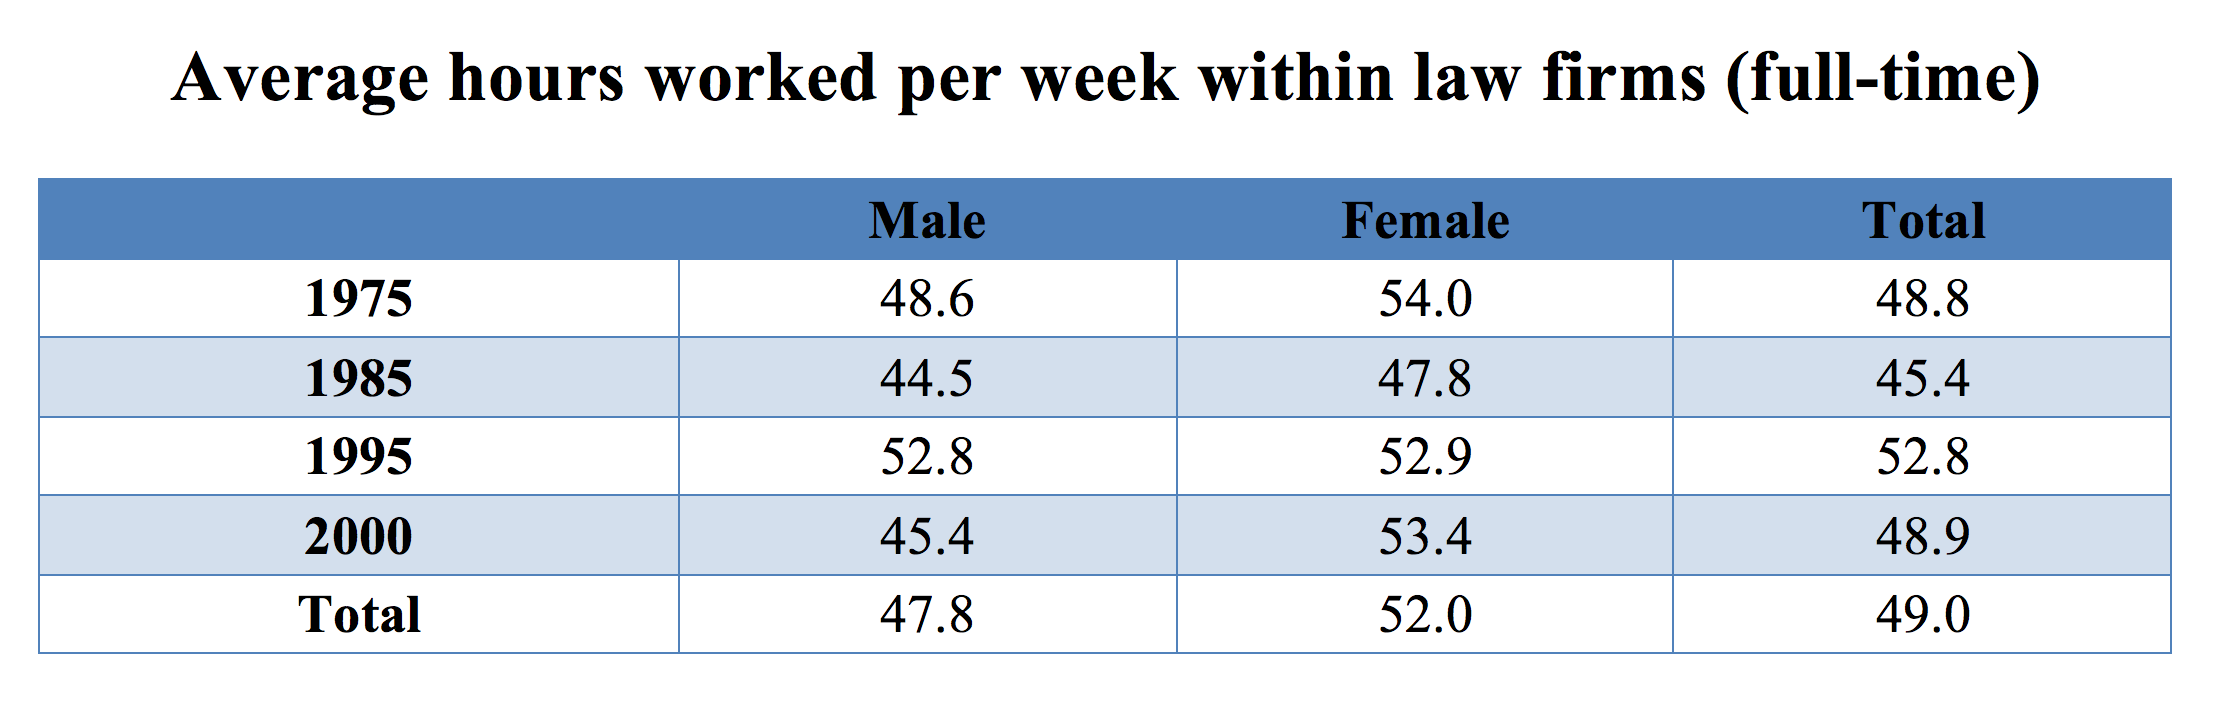 Average hours worked per week within law firms (full time). Source: HLSCS Preliminary Report.